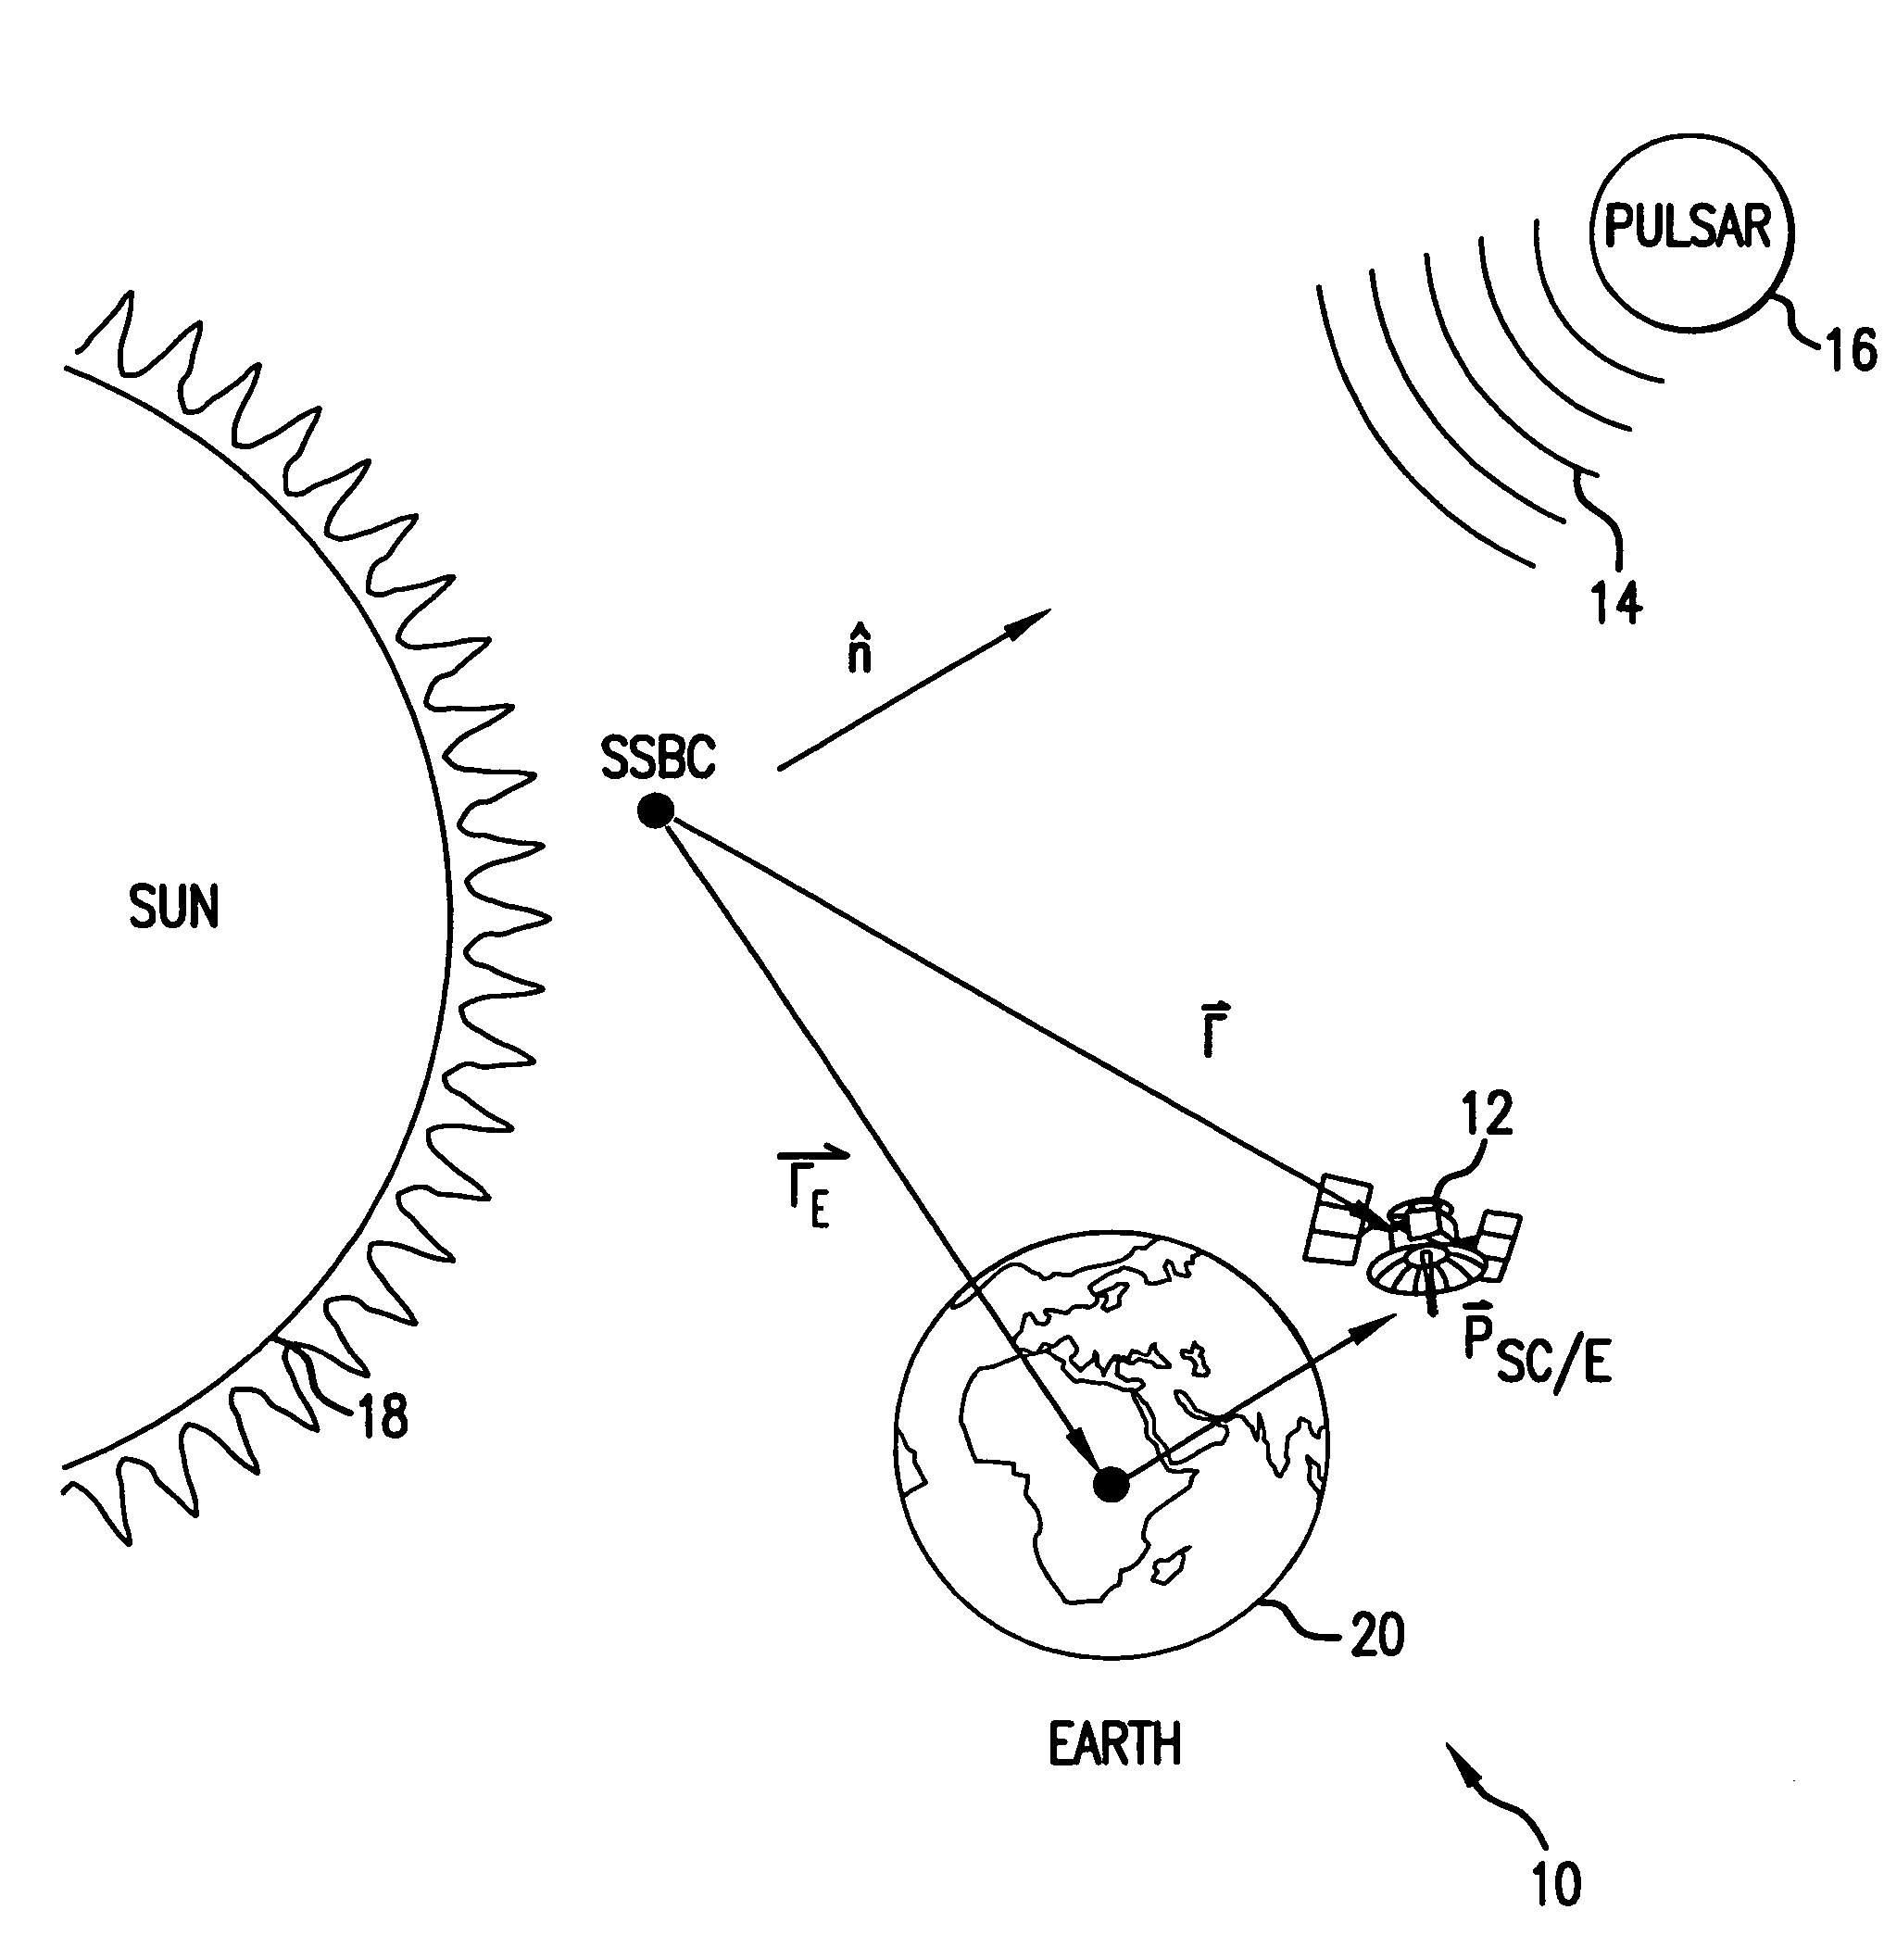 Navigational system and method utilizing sources of pulsed celestial radiation